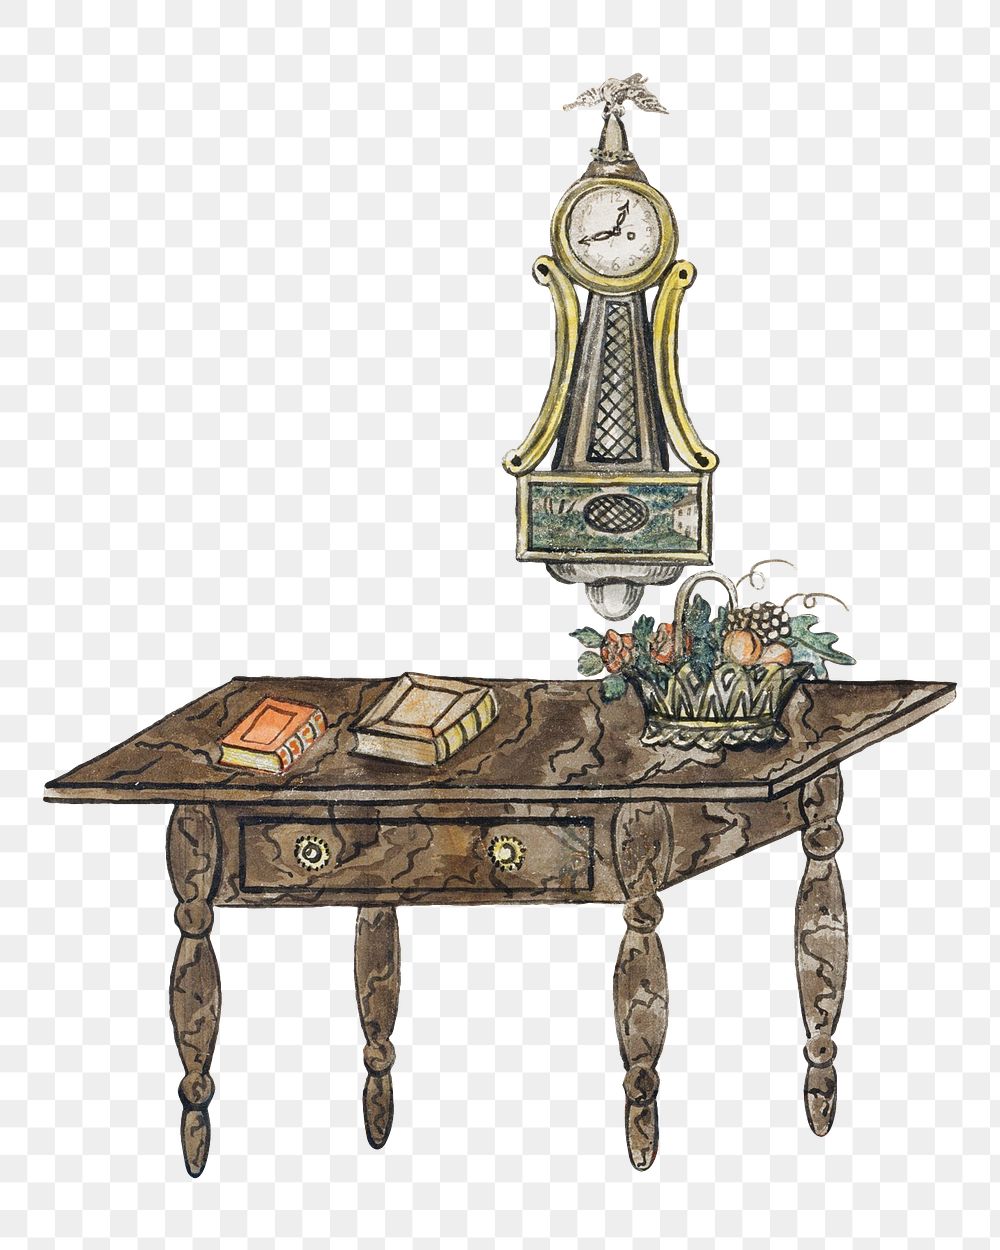 PNG Victorian reading table, vintage illustration by Joseph H. Davis, transparent background. Remixed by rawpixel.